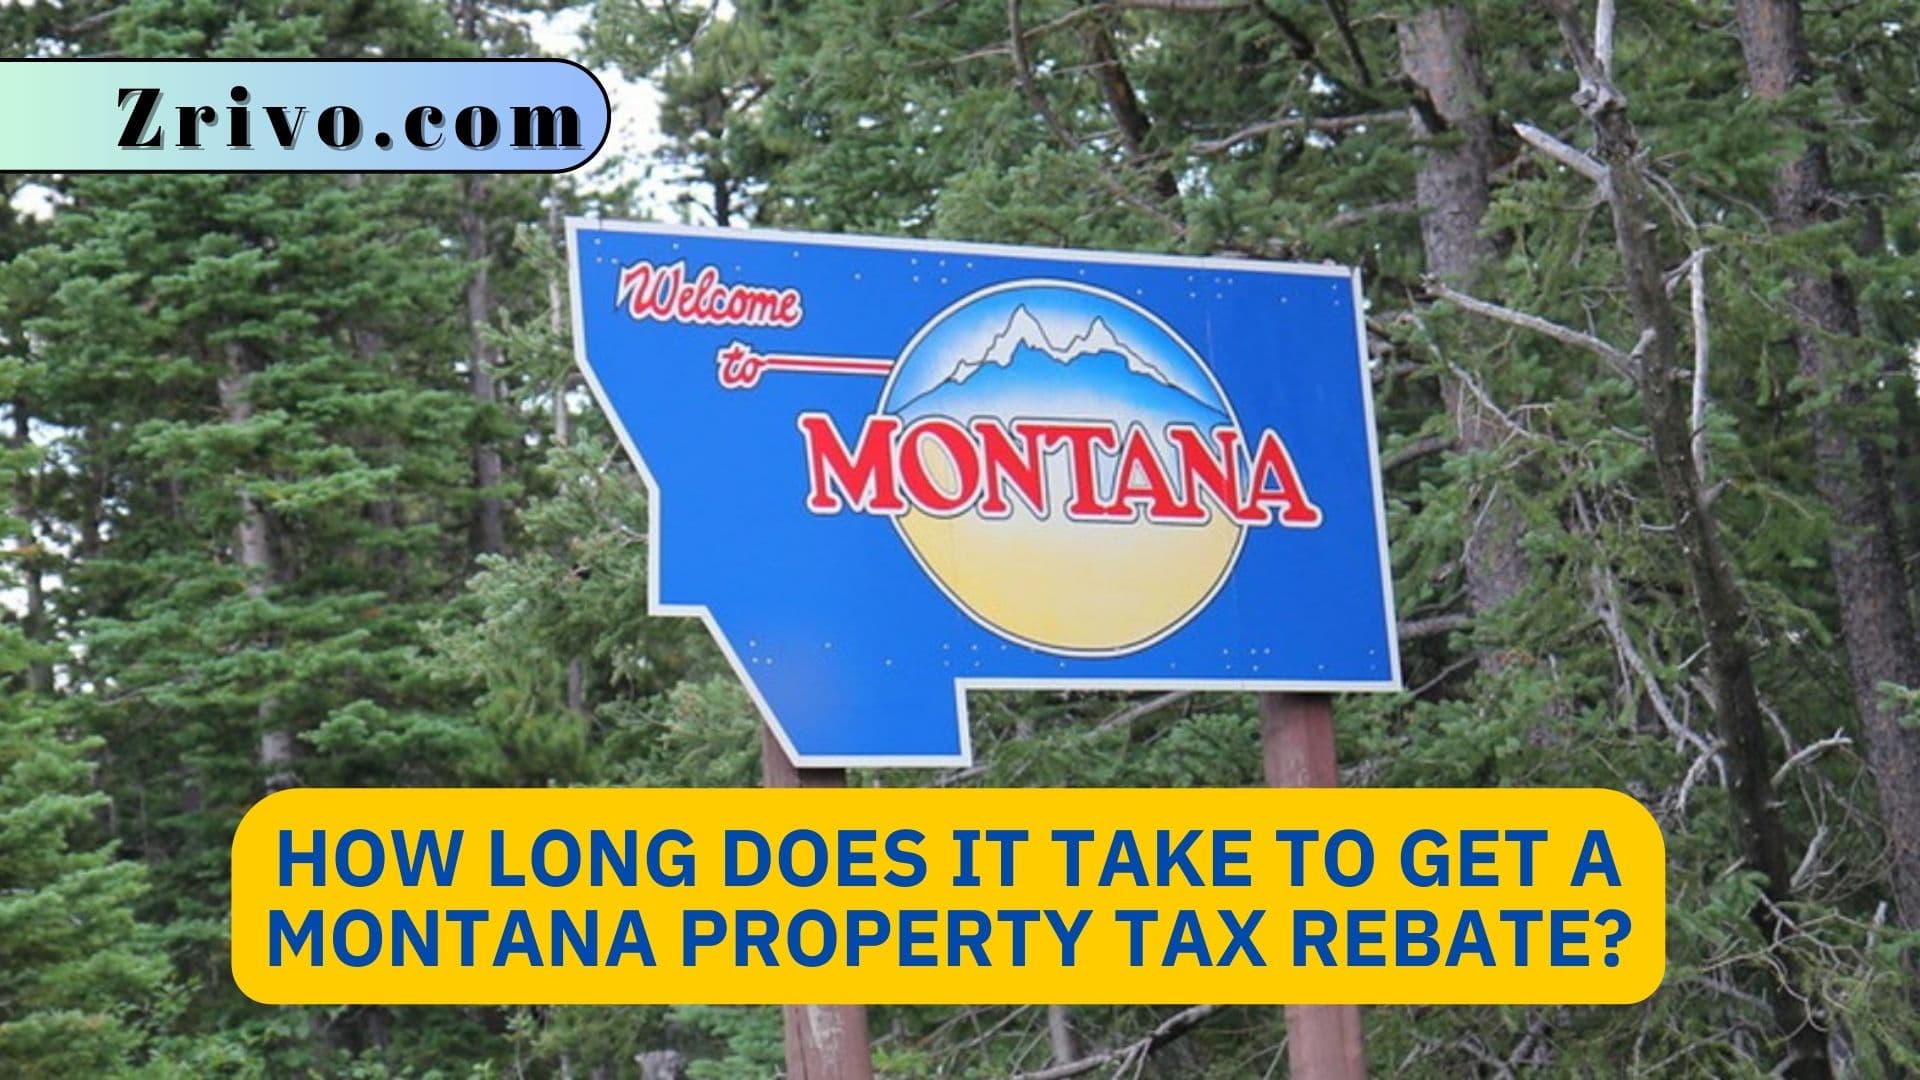 How Long Does It Take To Get A Montana Property Tax Rebate?